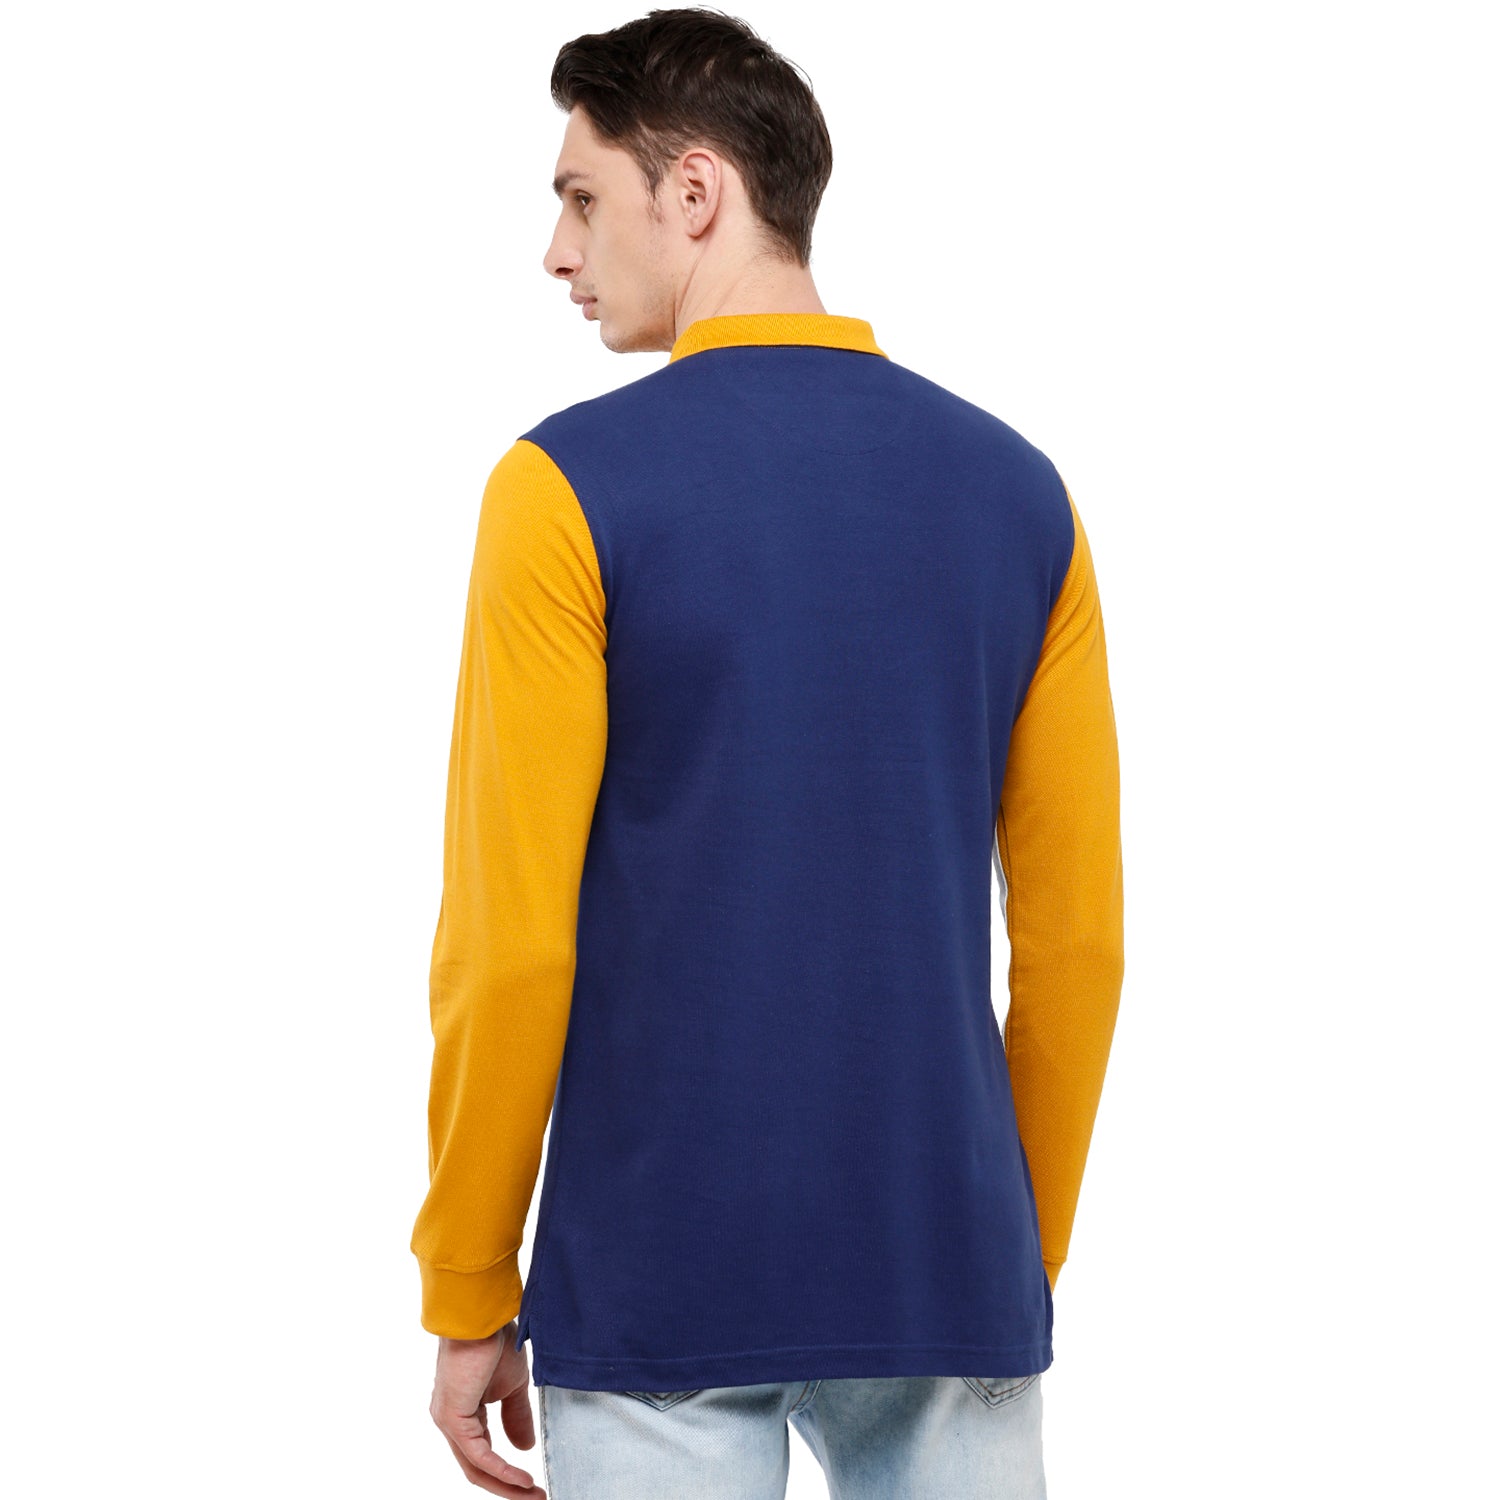 Classic Polo Men's Yellow & Blue Color Block Polo Full Sleeve Slim Fit T-Shirt - VERNO - 258 A SF P T-shirt Classic Polo 